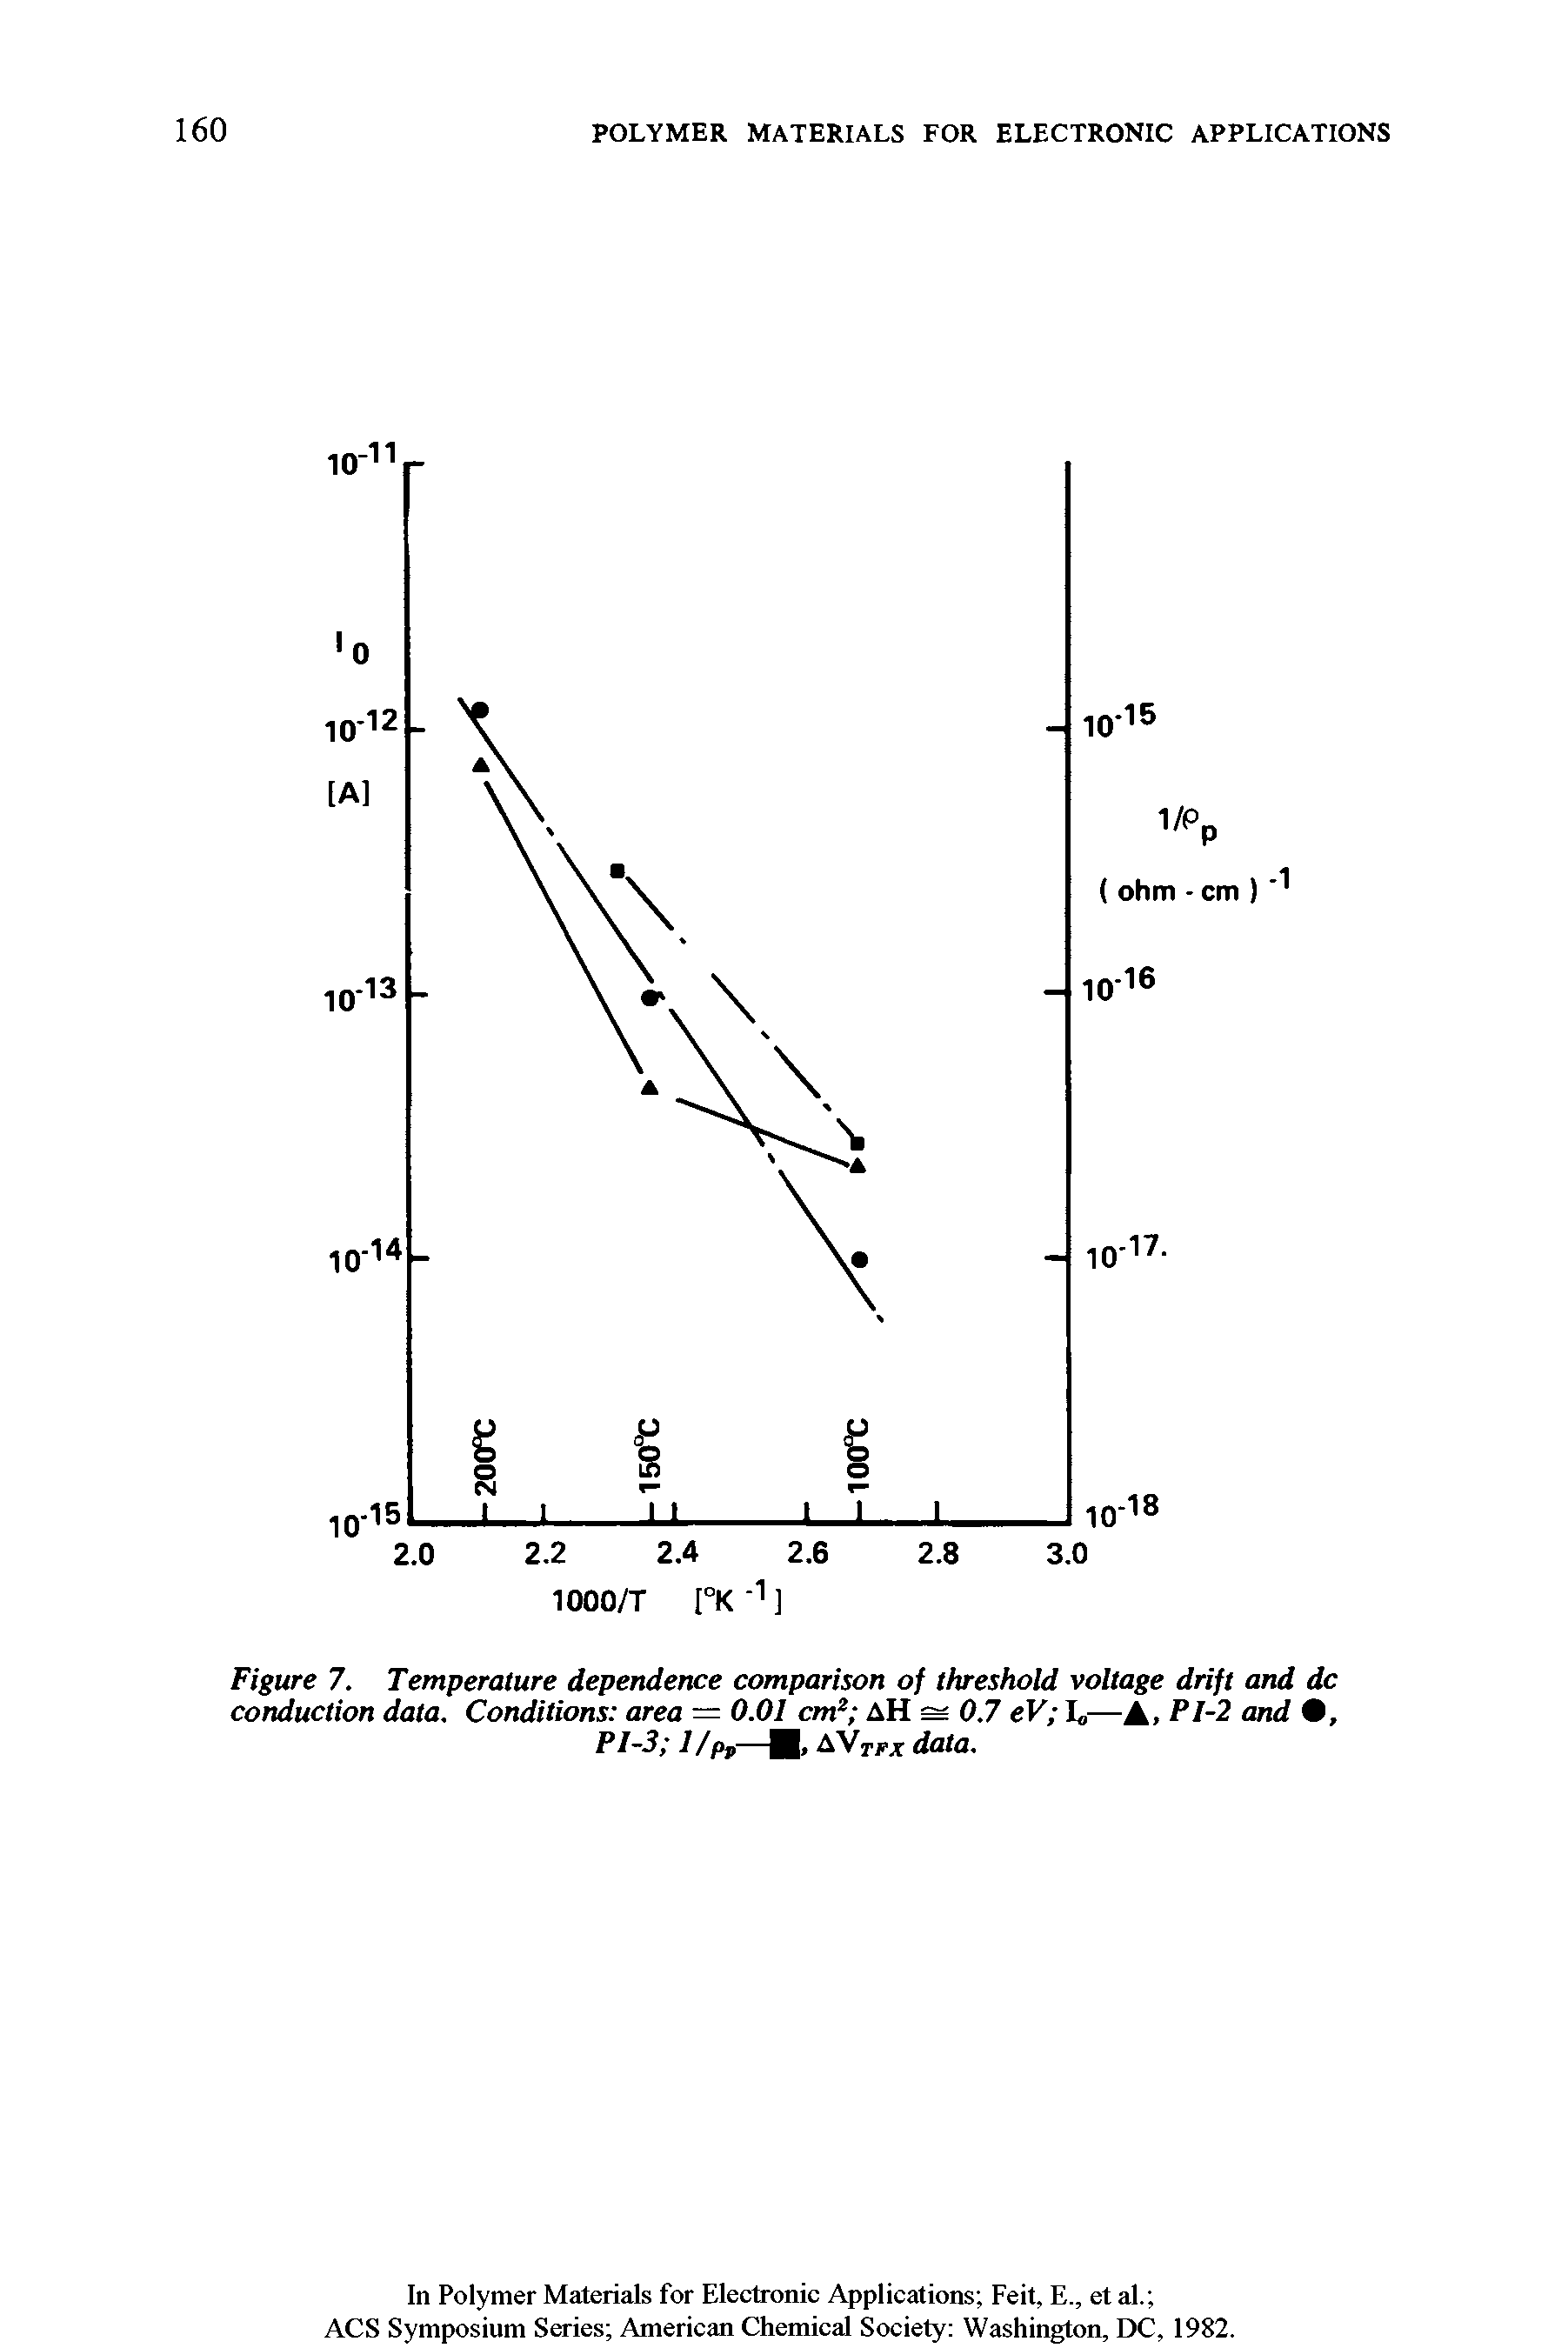 Figure 7. Temperature dependence comparison of threshold voltage drift and dc conduction data. Conditions area = 0.01 cm AH = 0.7 eV I —A> PI-2 and , PI-3 I/pp—AVrjpjc data.